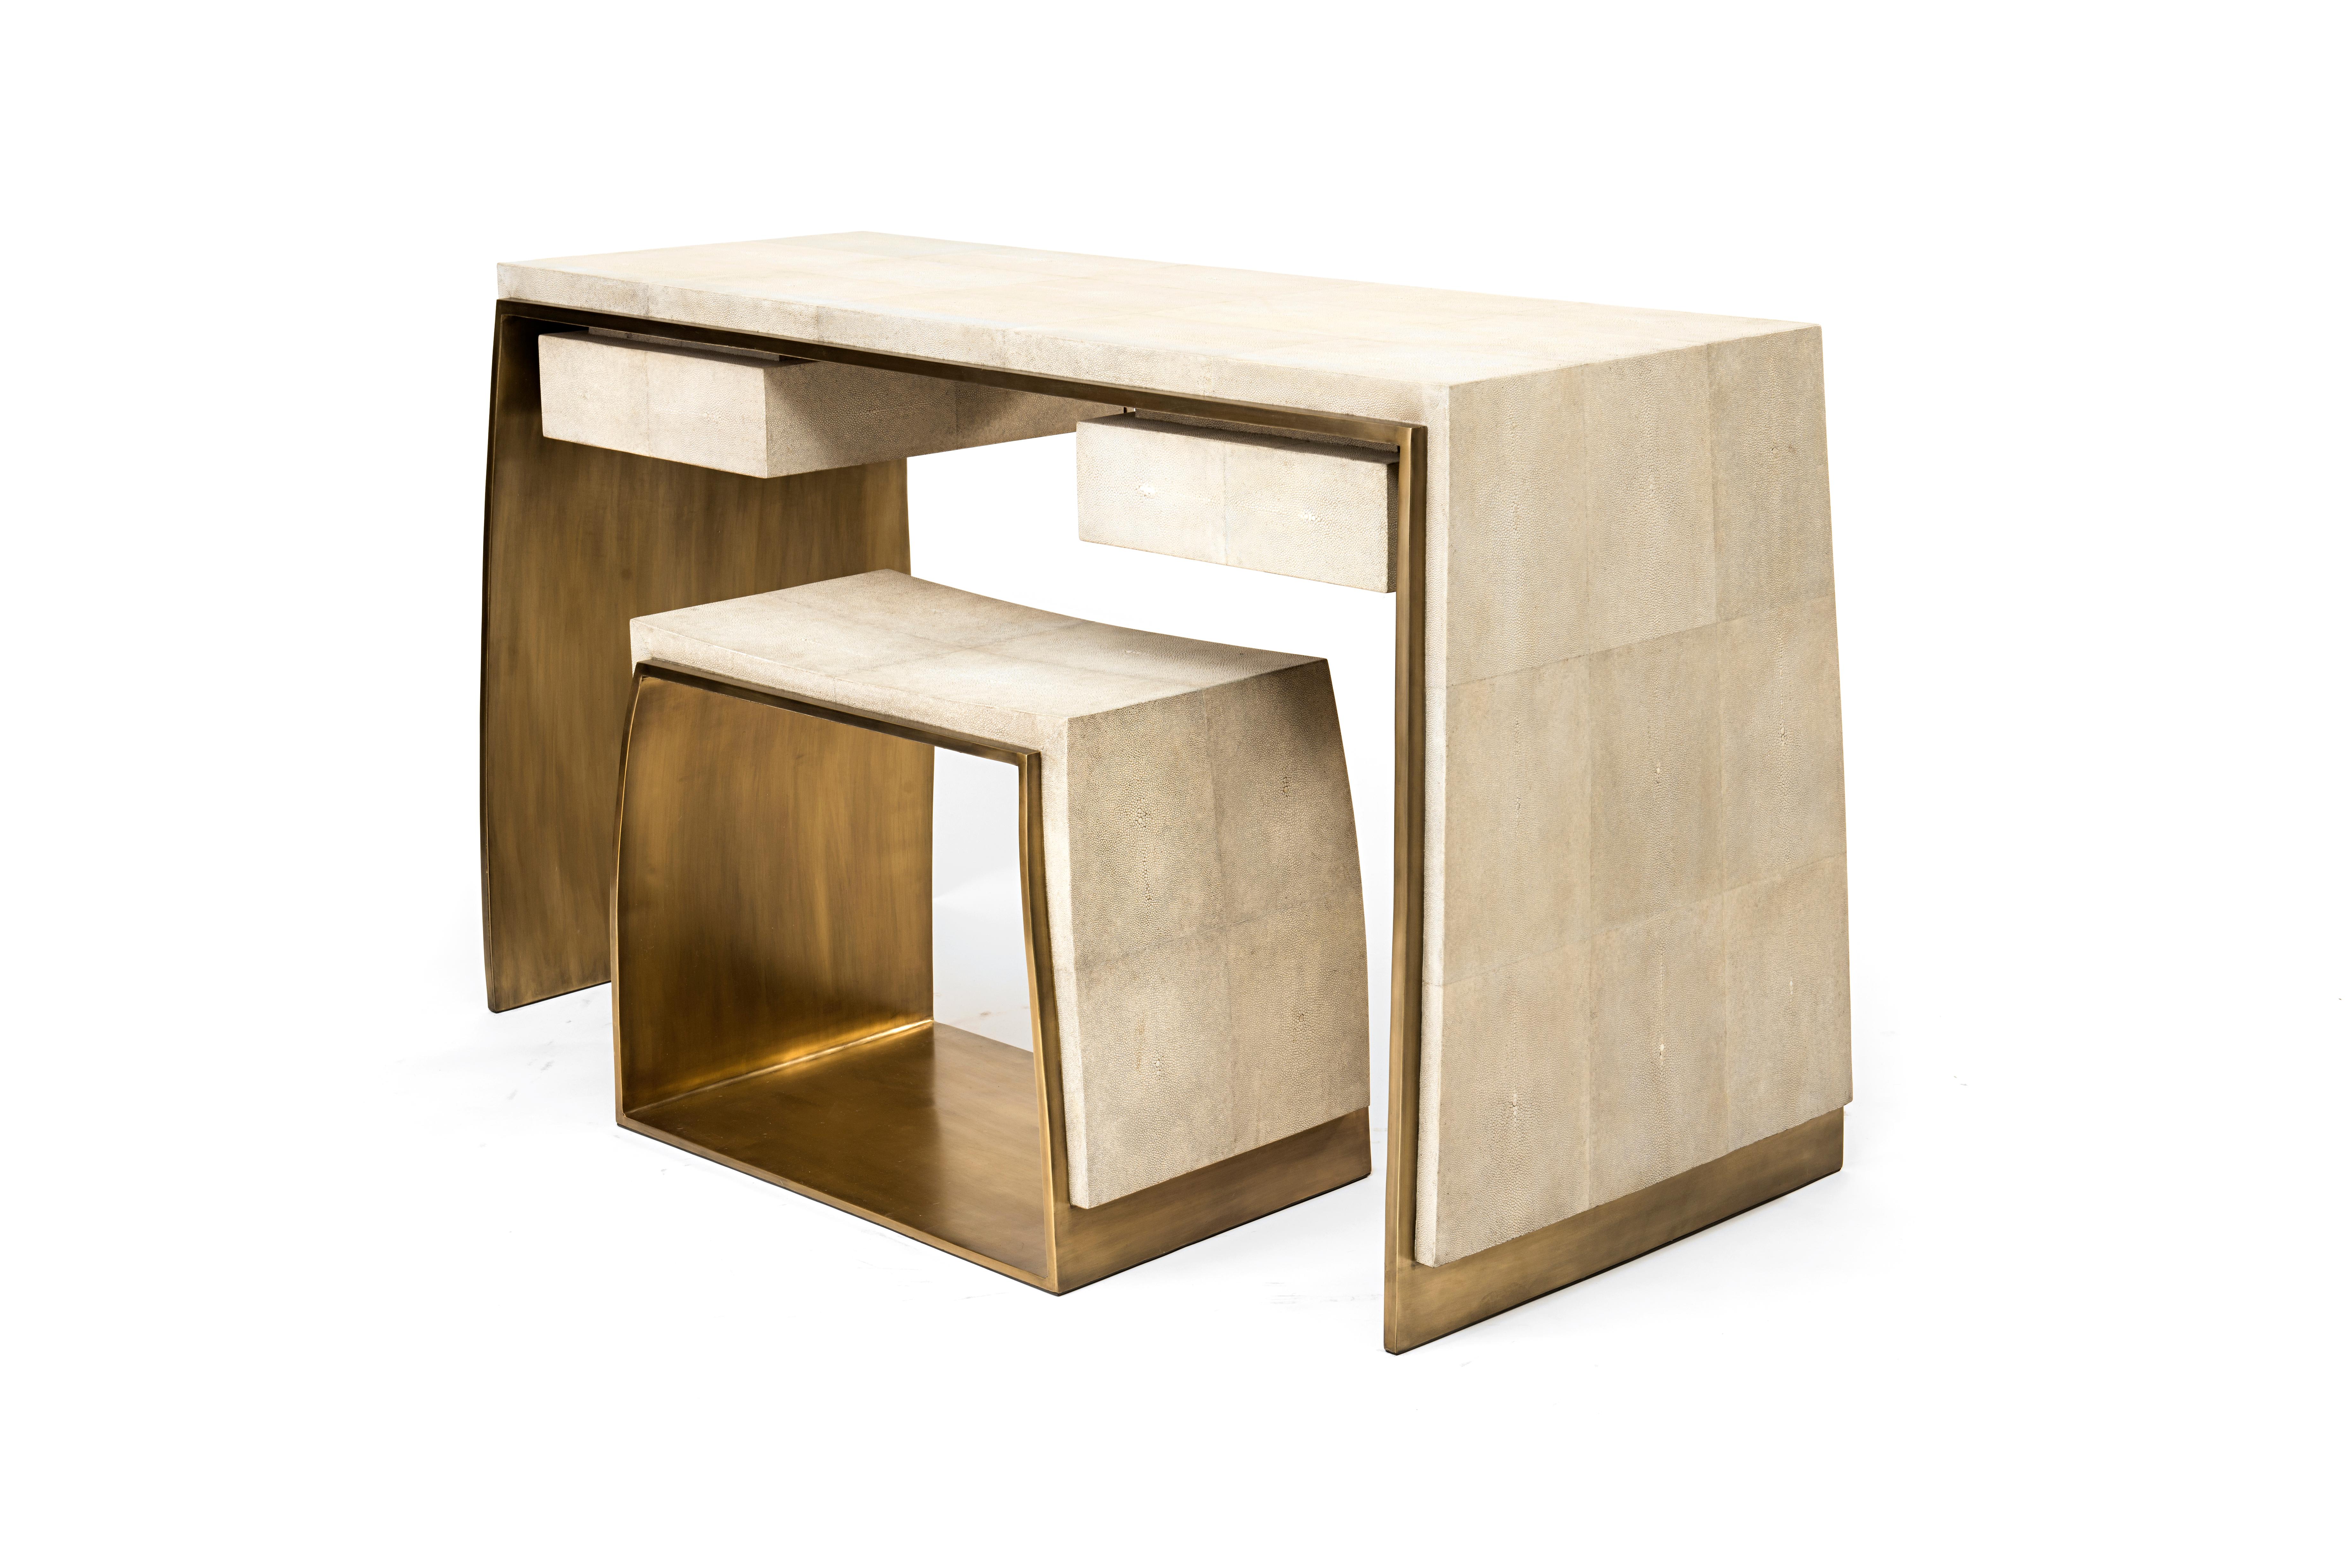 The Laurens Writing Desk and matching Stool are both graphic and minimalist with their asymmetry overlay of cream shagreen sitting on top of a bronze-patina brass structure. The desk includes 2 drawers. Pieces can be sold separately. A console